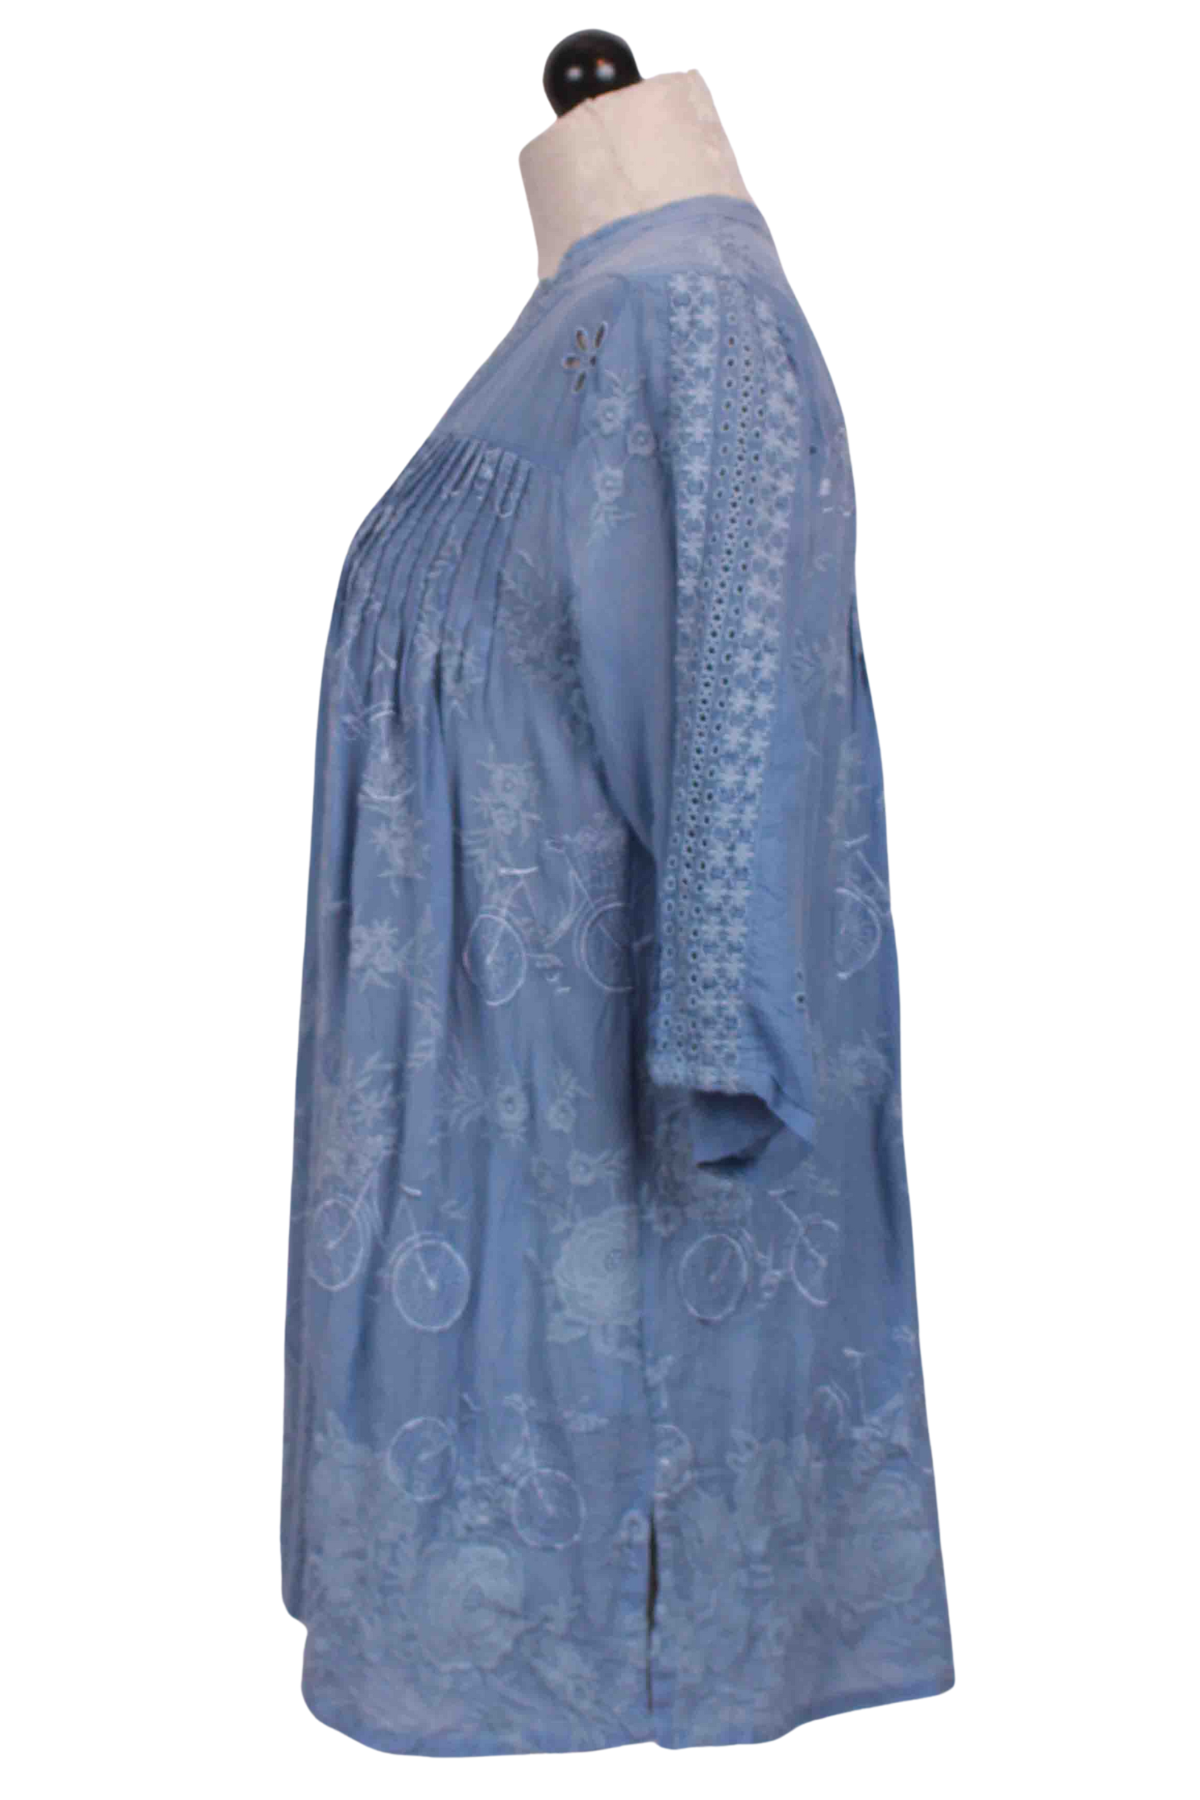 Side view of Blissful Blue Tili Ryder Tunic by Johnny Was